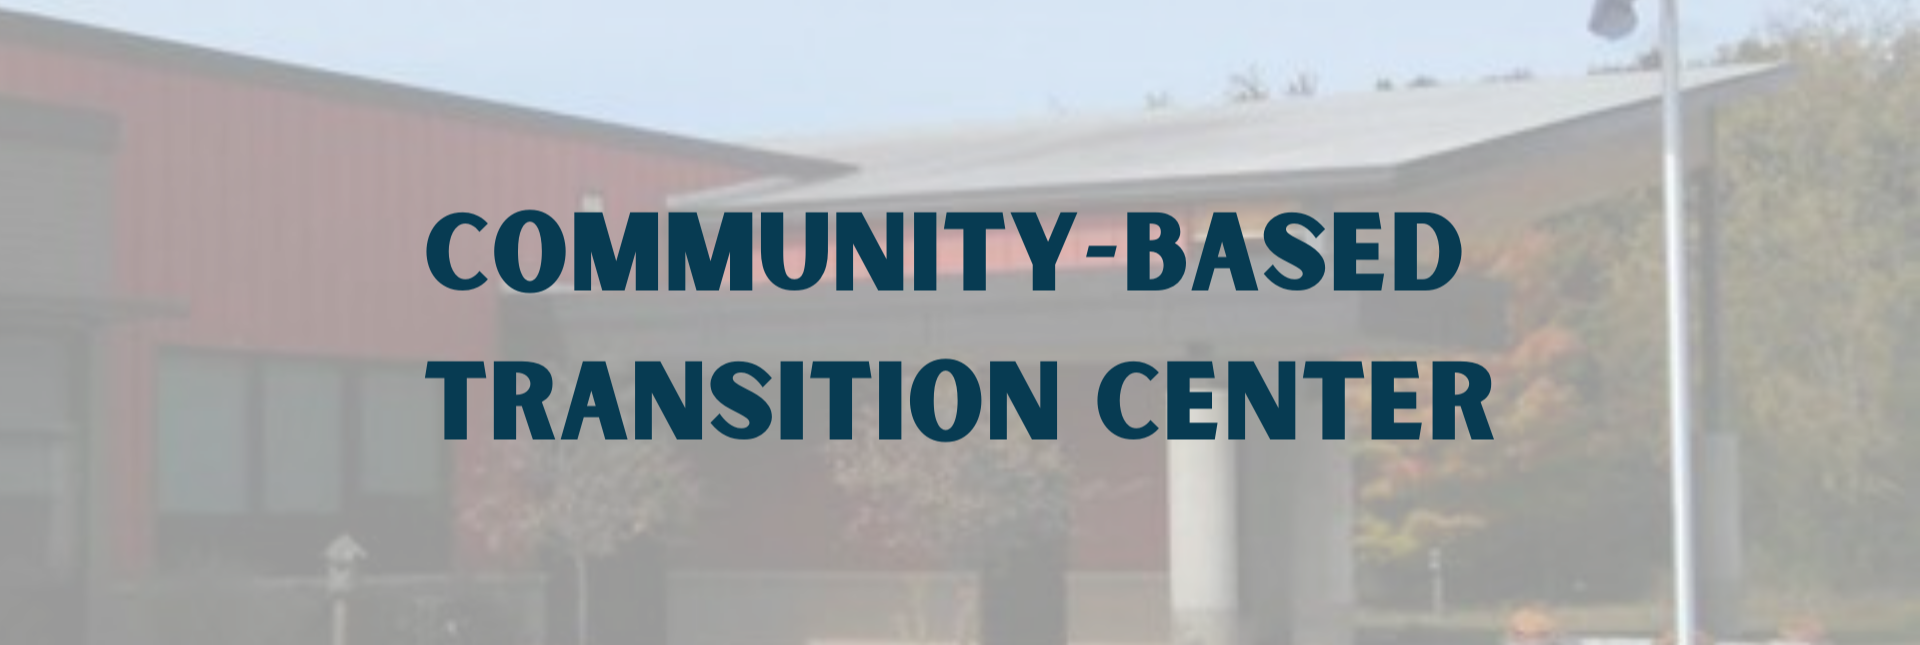 Photo of the Community-based Transition Center building with overlaid text: "Community-based Transition Center"